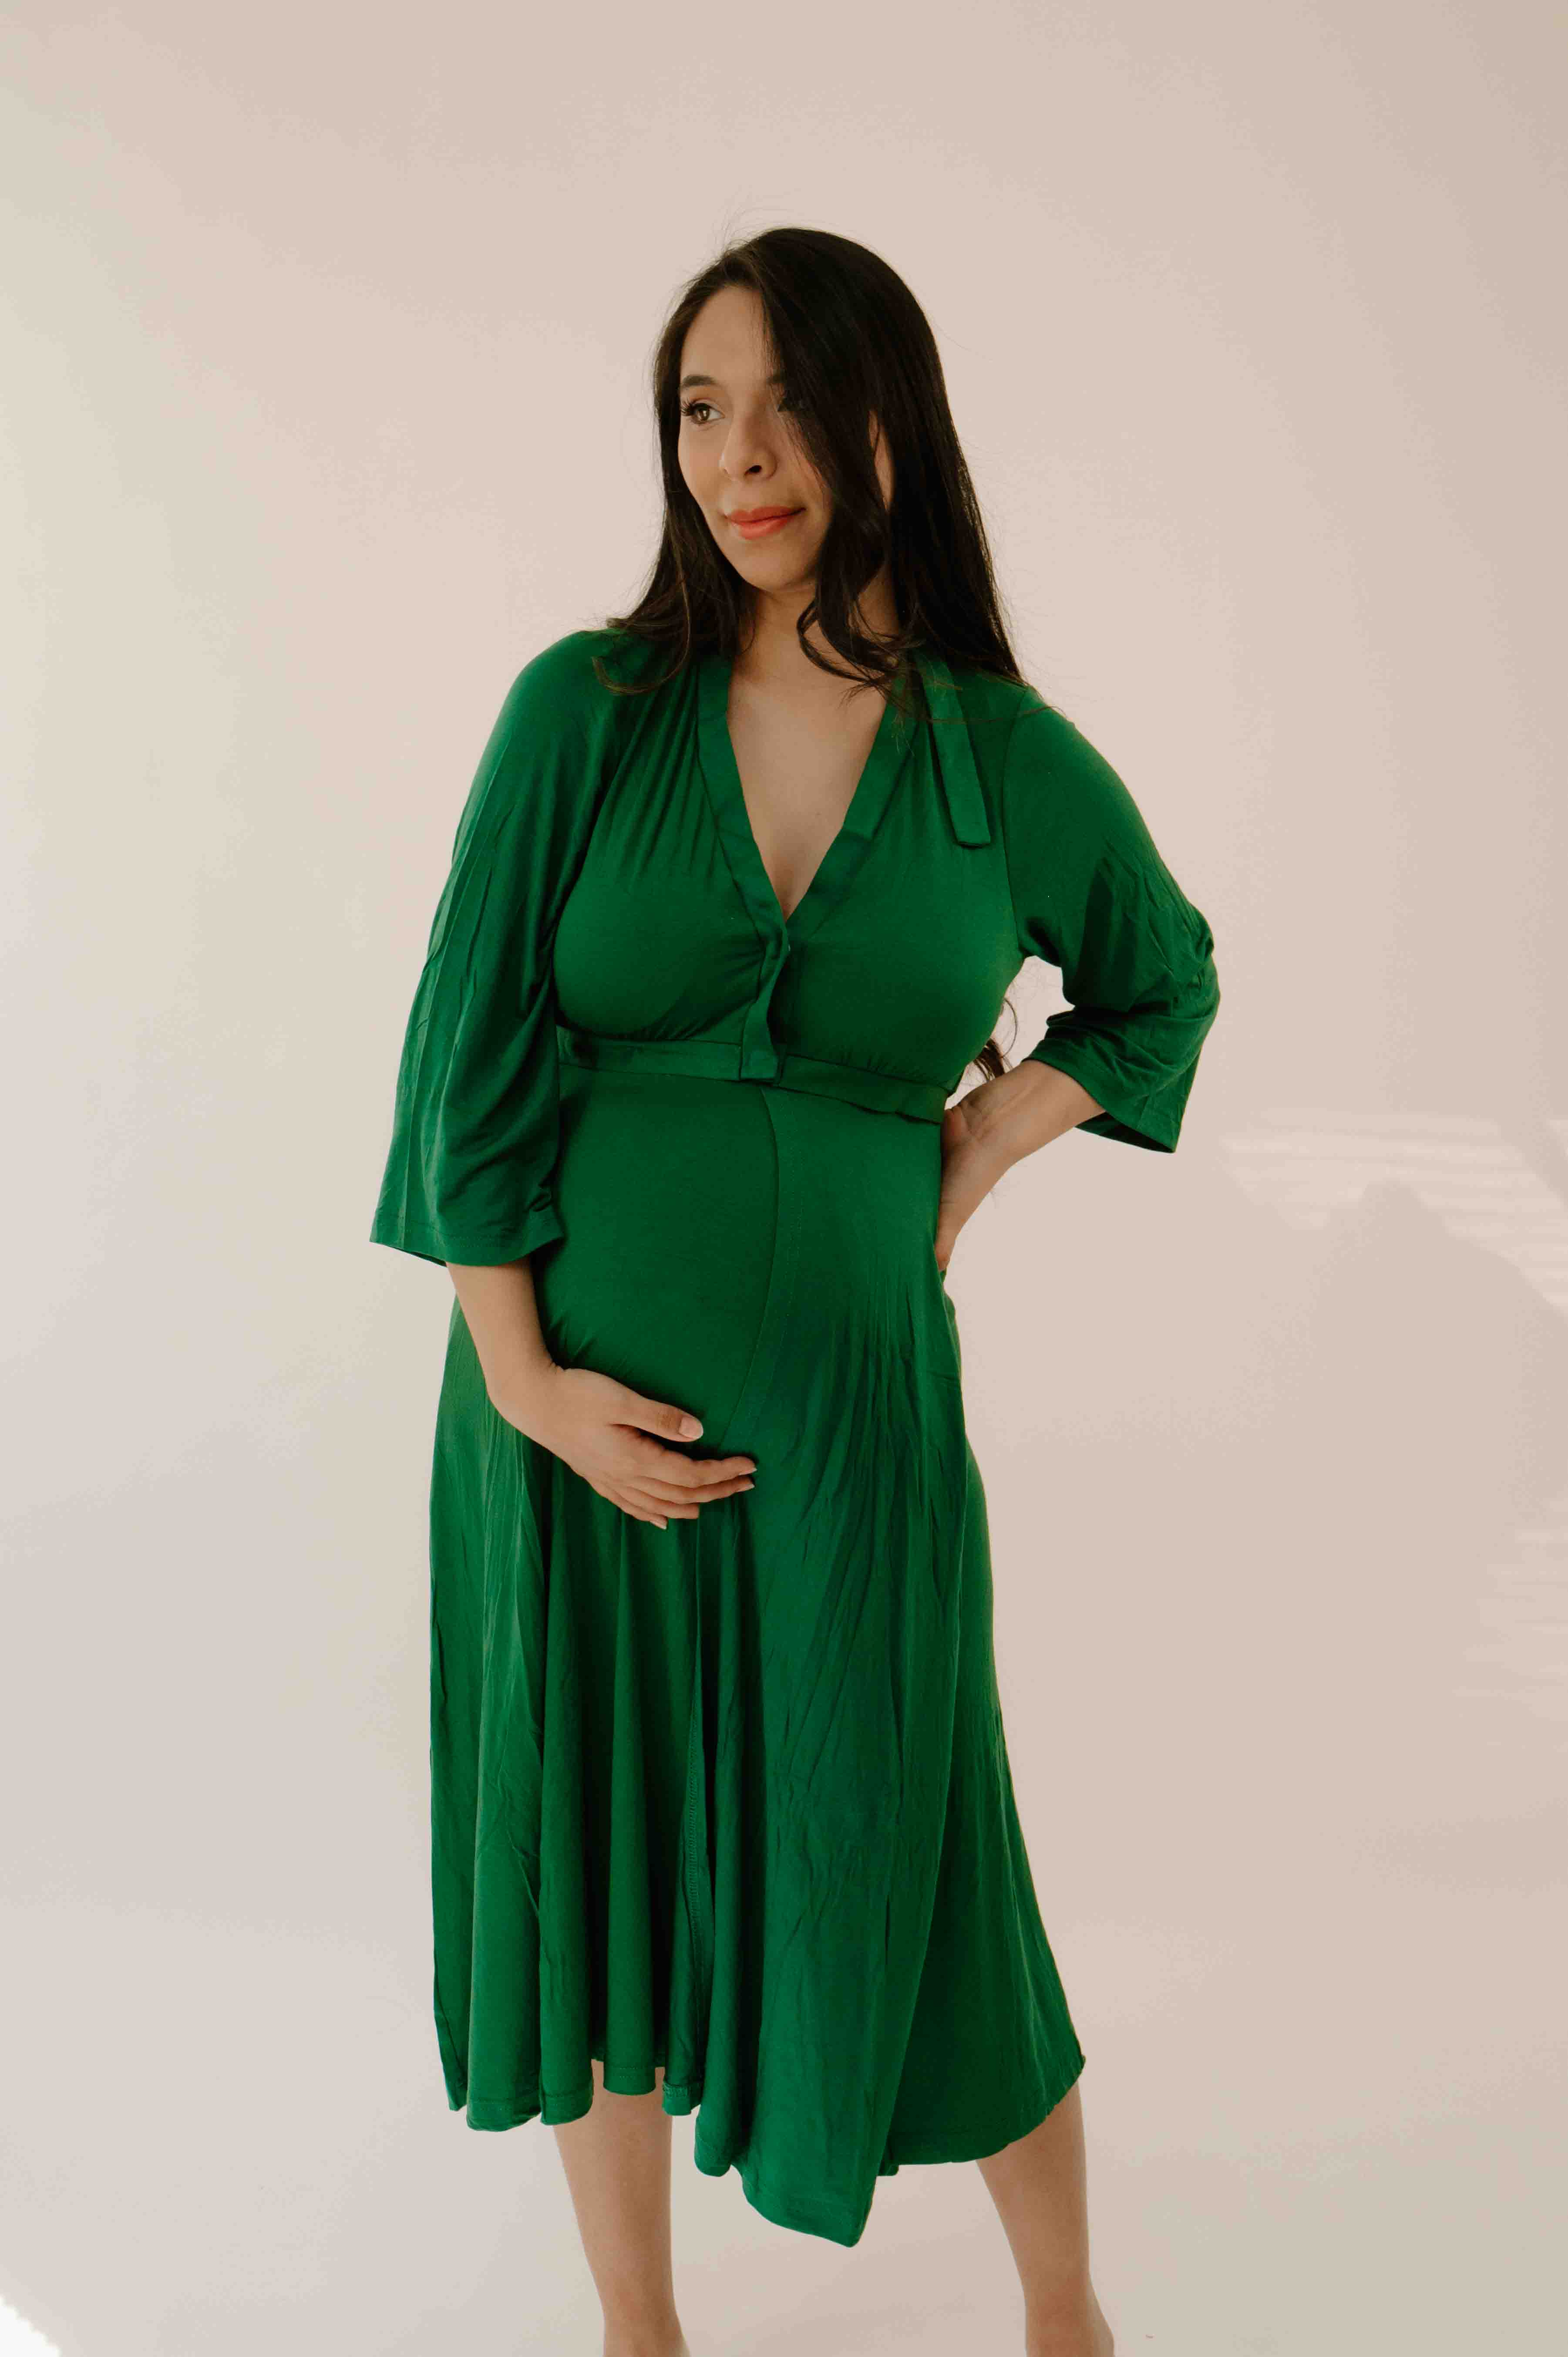 Maternity Hospital Gown,maternity Robe, Labour & Delivery Gown, Birthing  Gown, Maternity Clothes, Hospital Gown, Nursing Robe, Feeding Robe 